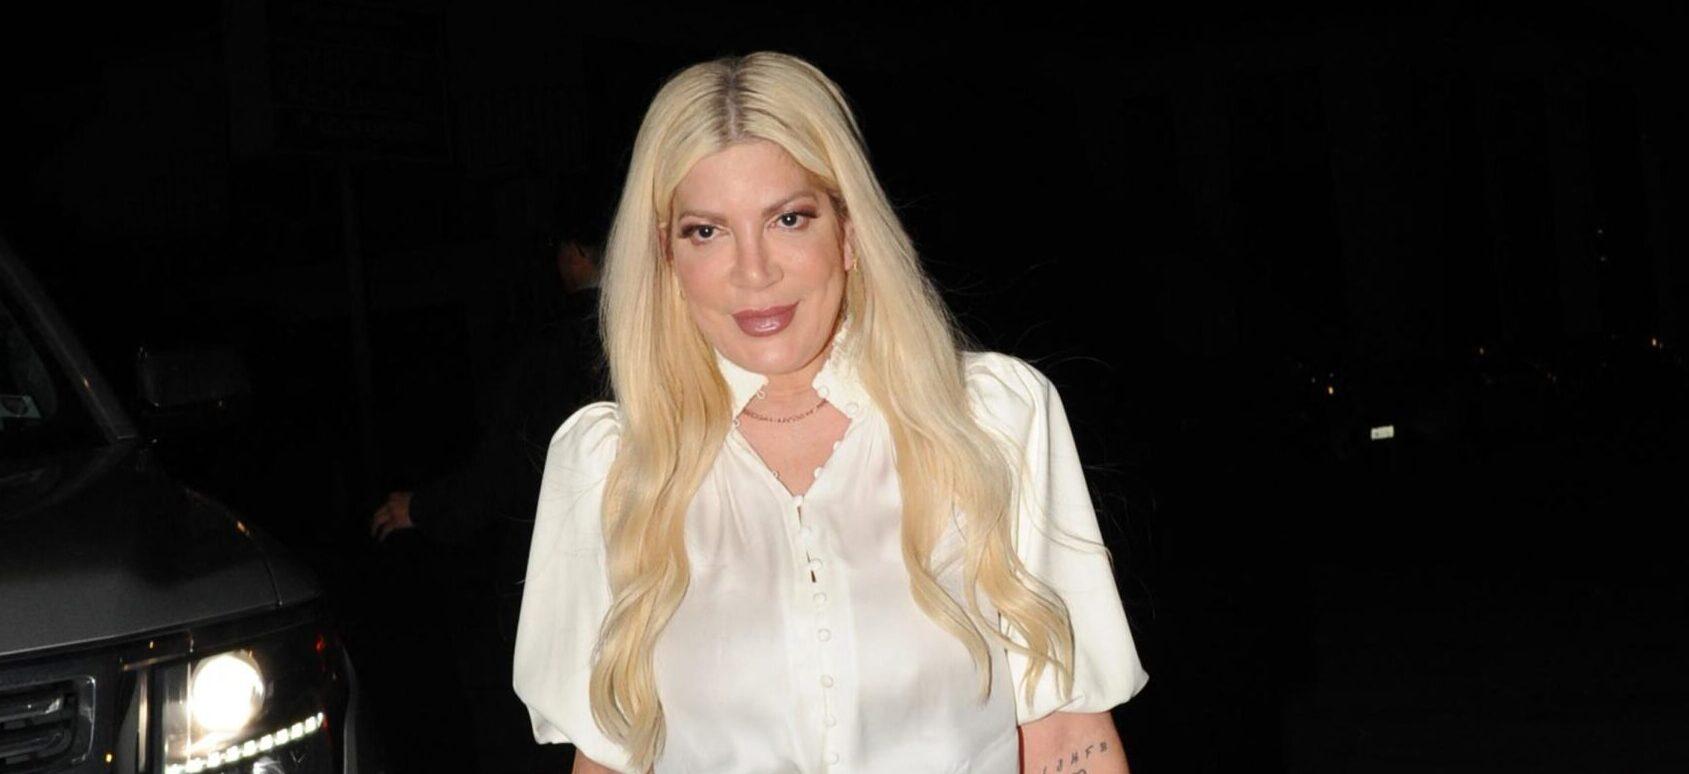 Tori Spelling Calls Out Real Estate Agent Who Mocks Her Family’s Mold Situation: ‘Shame On You’